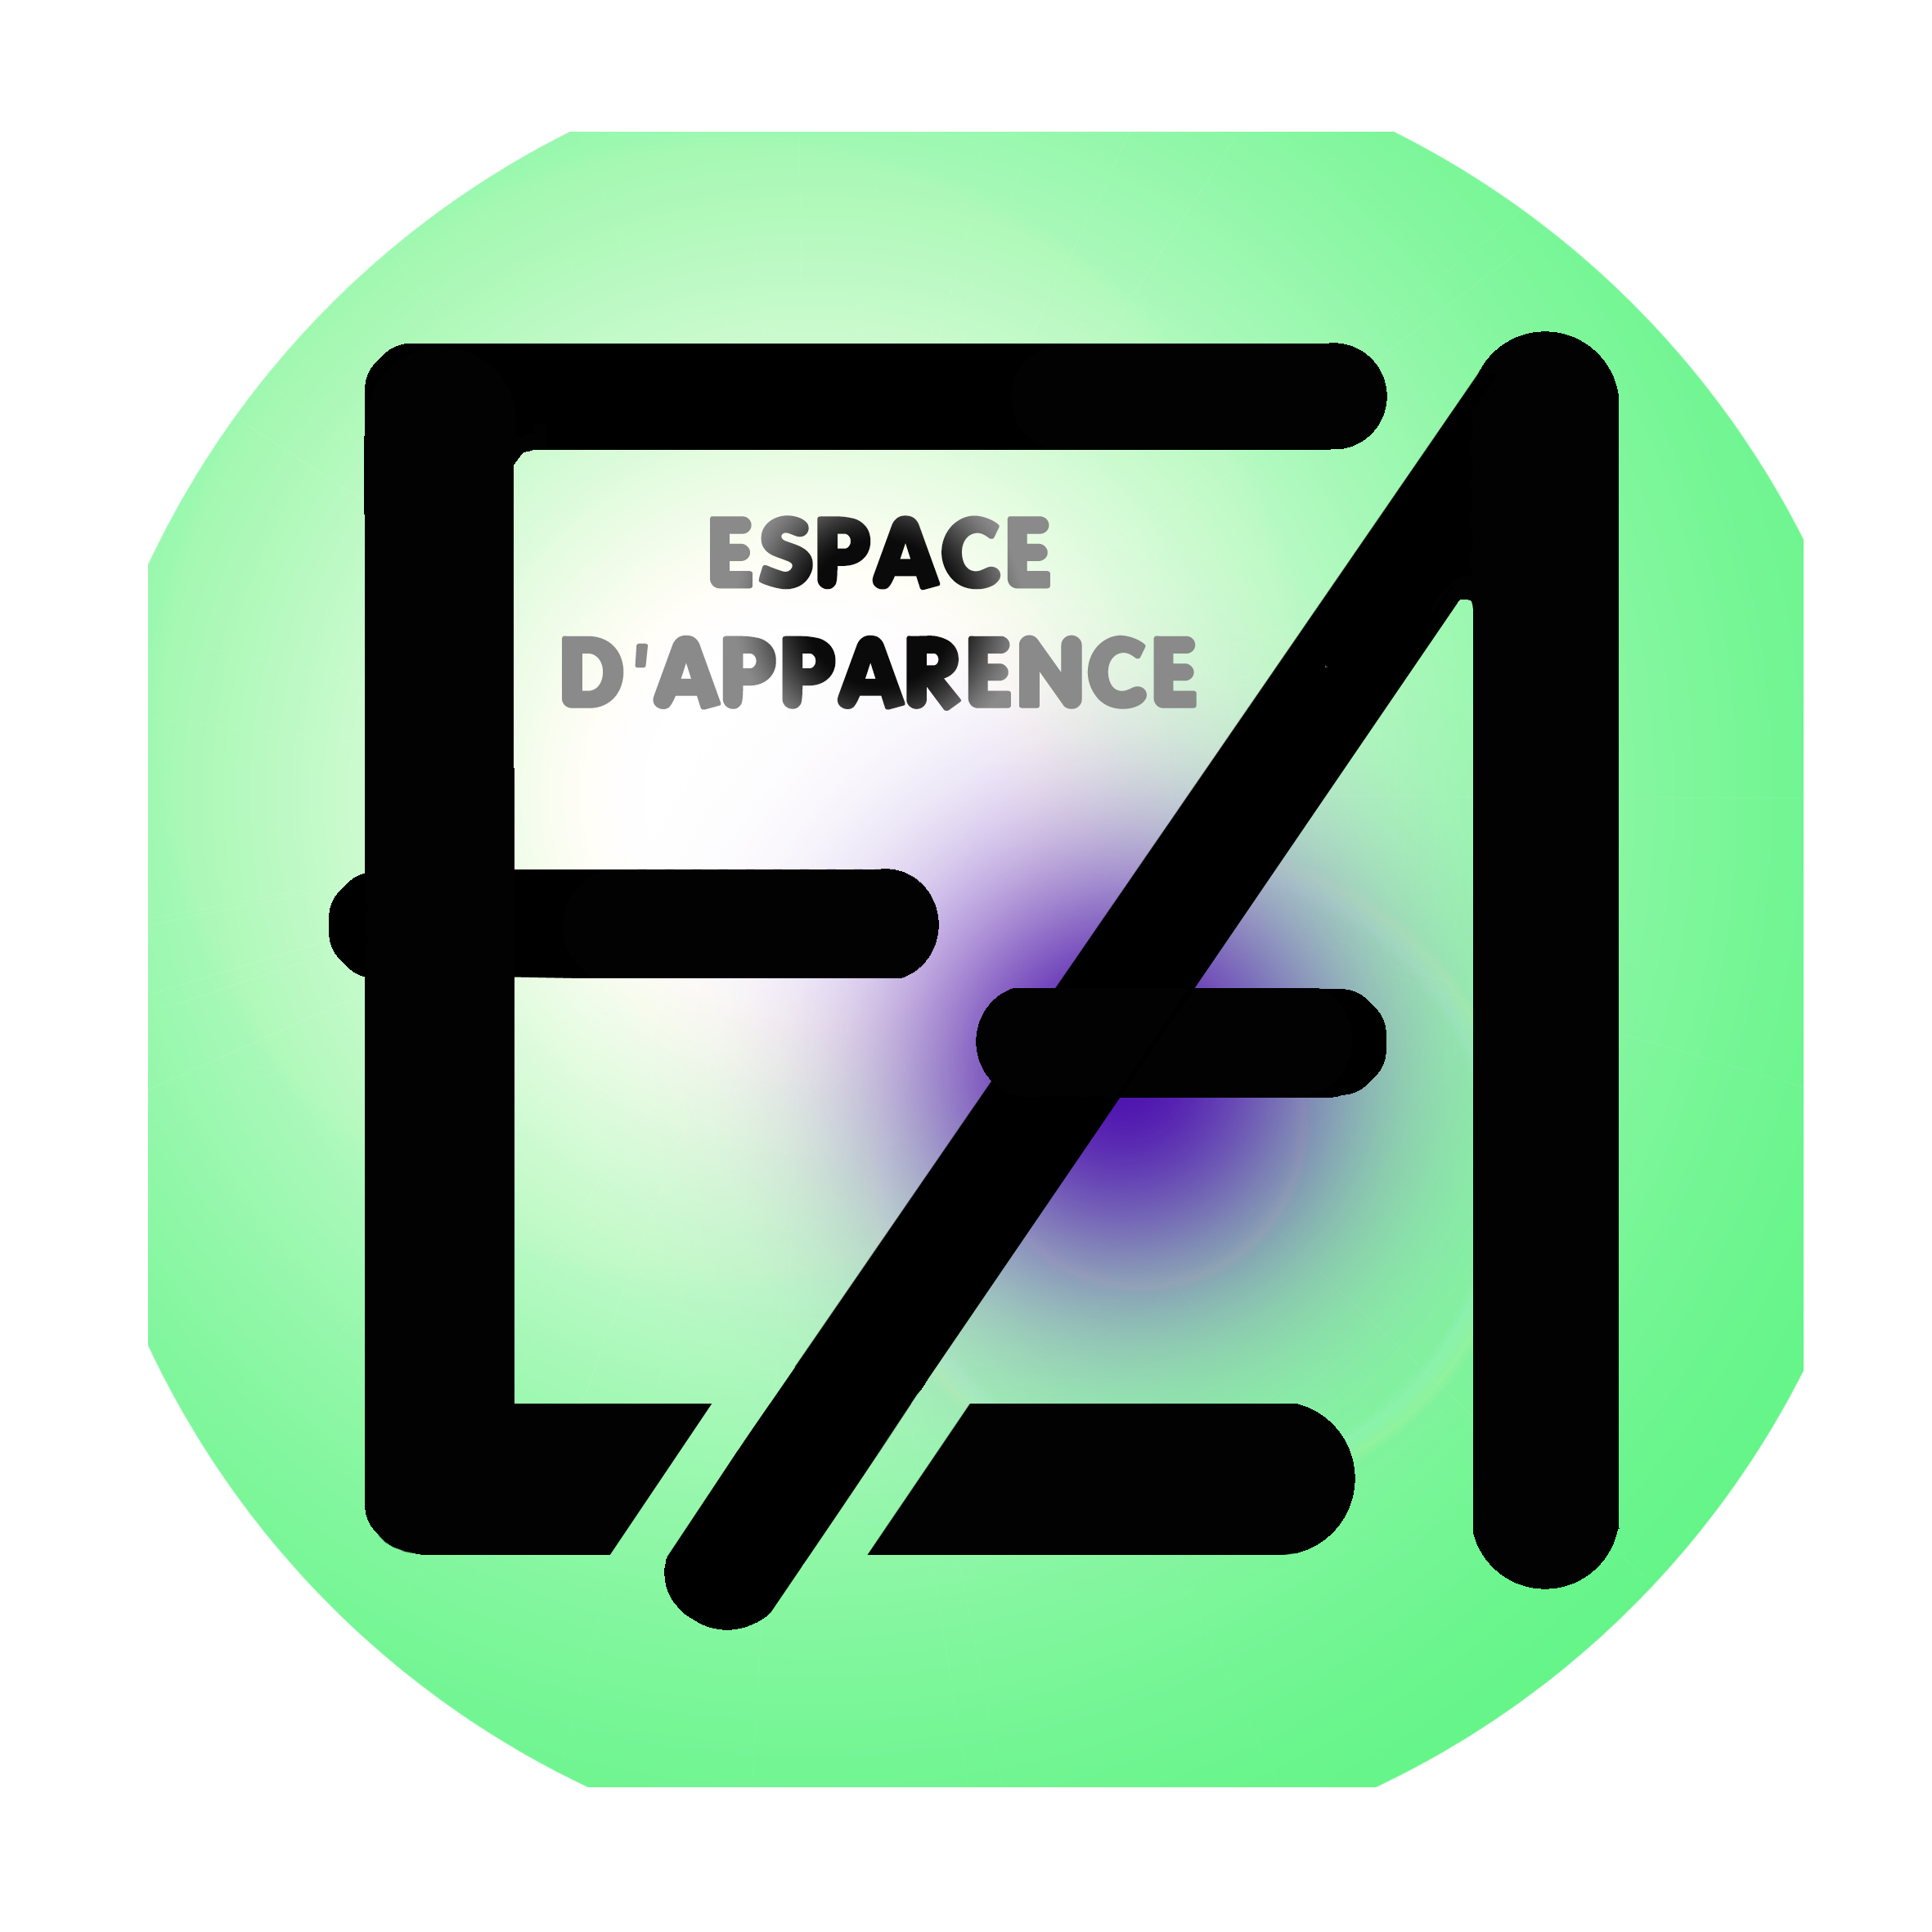 Espace d'apparence